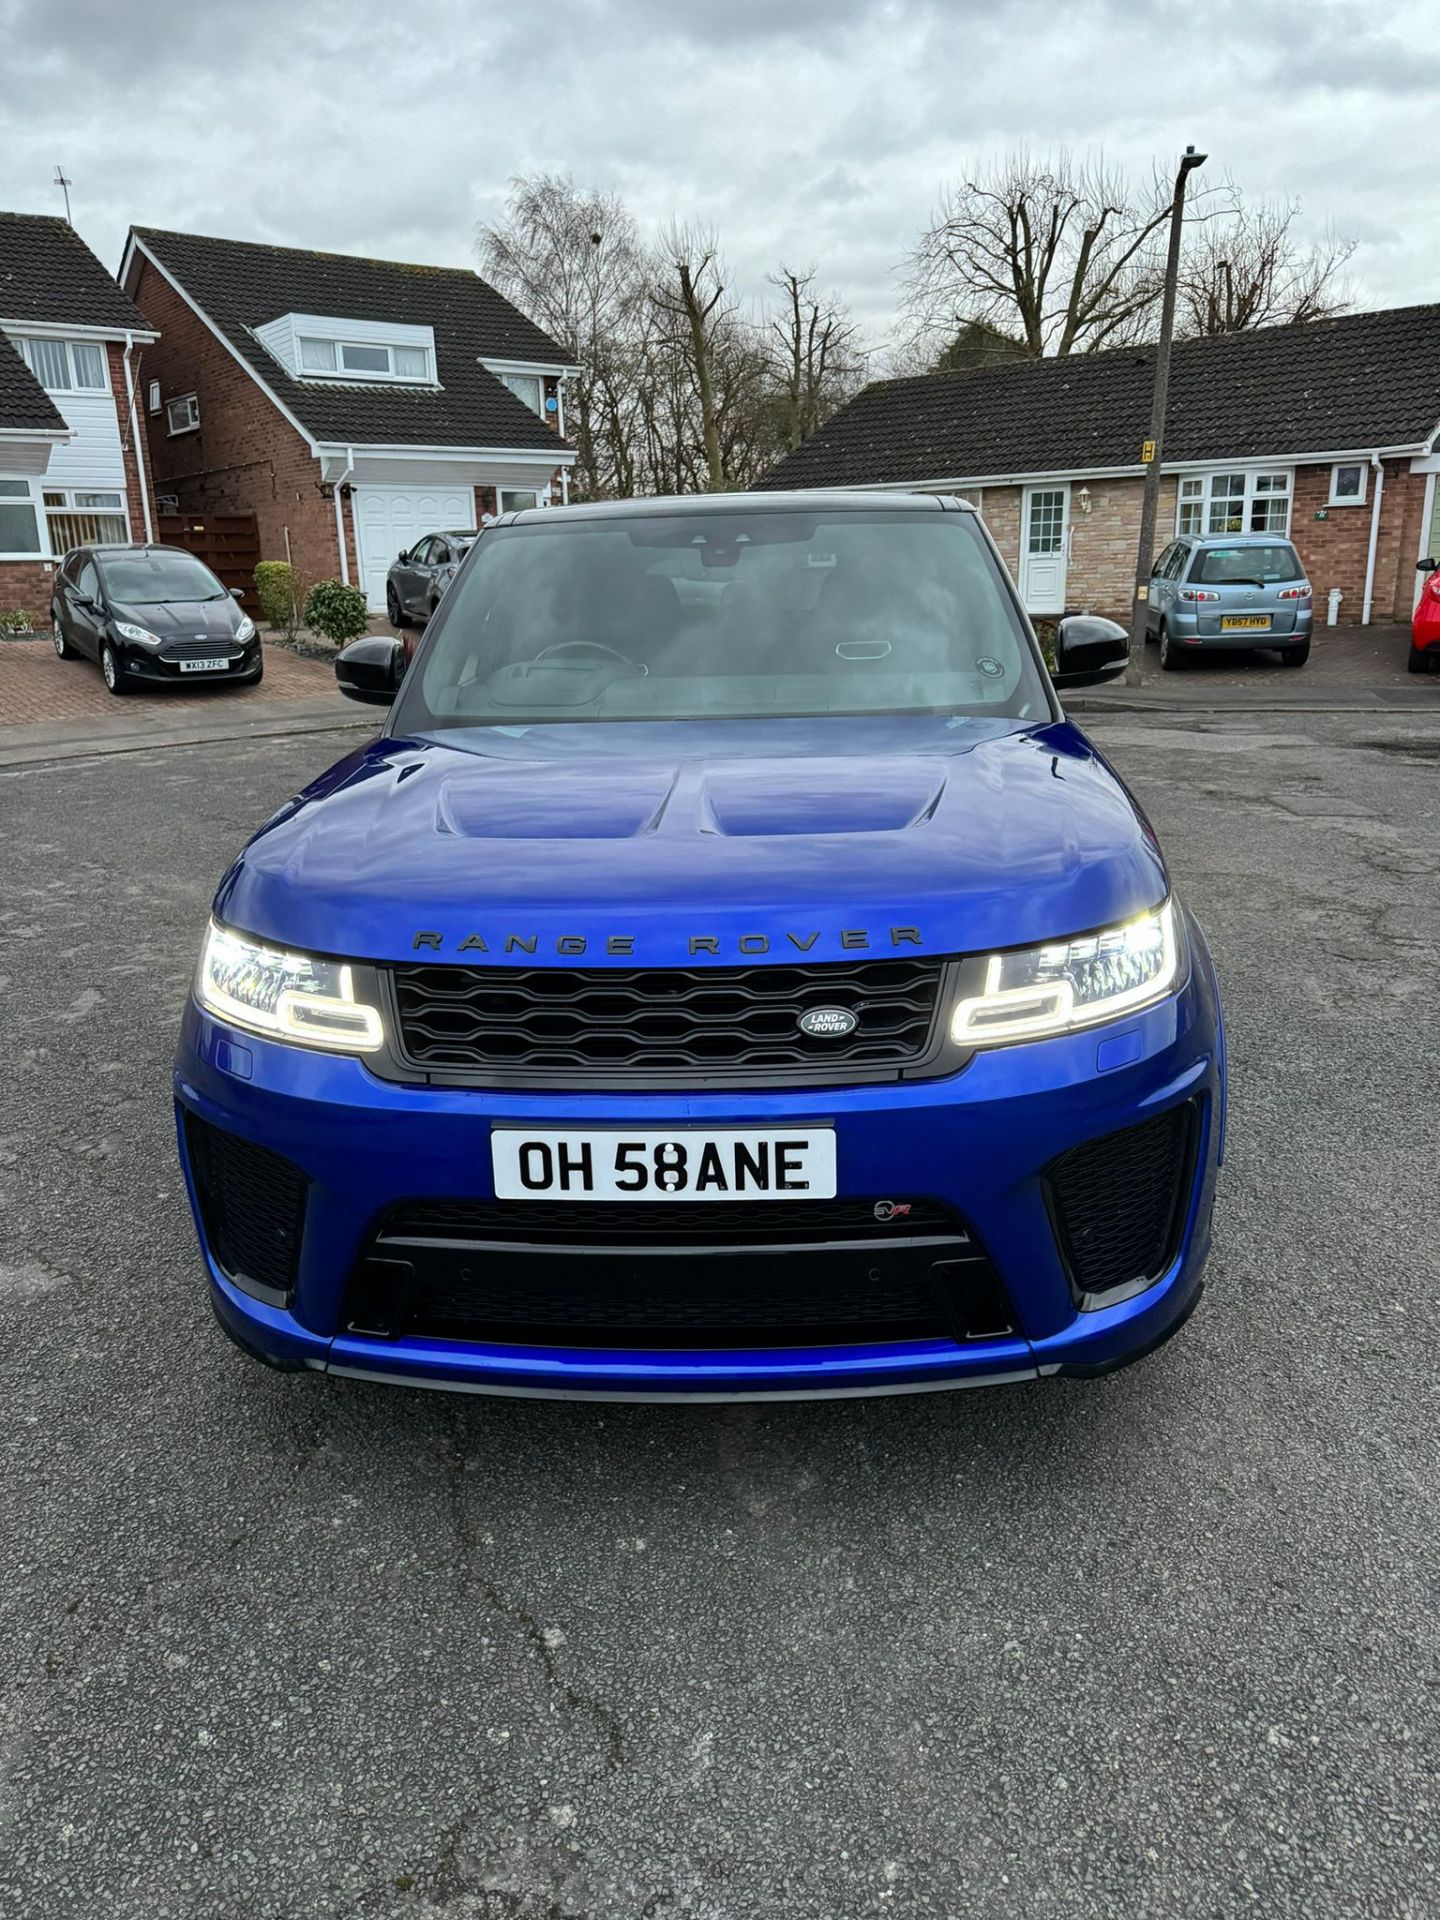 2018 18 RANGE ROVER SVR - 62K MILES WITH FULL LAND ROVER HISTORY - EXTREMELY CLEAN EXAMPLE. - Image 5 of 10